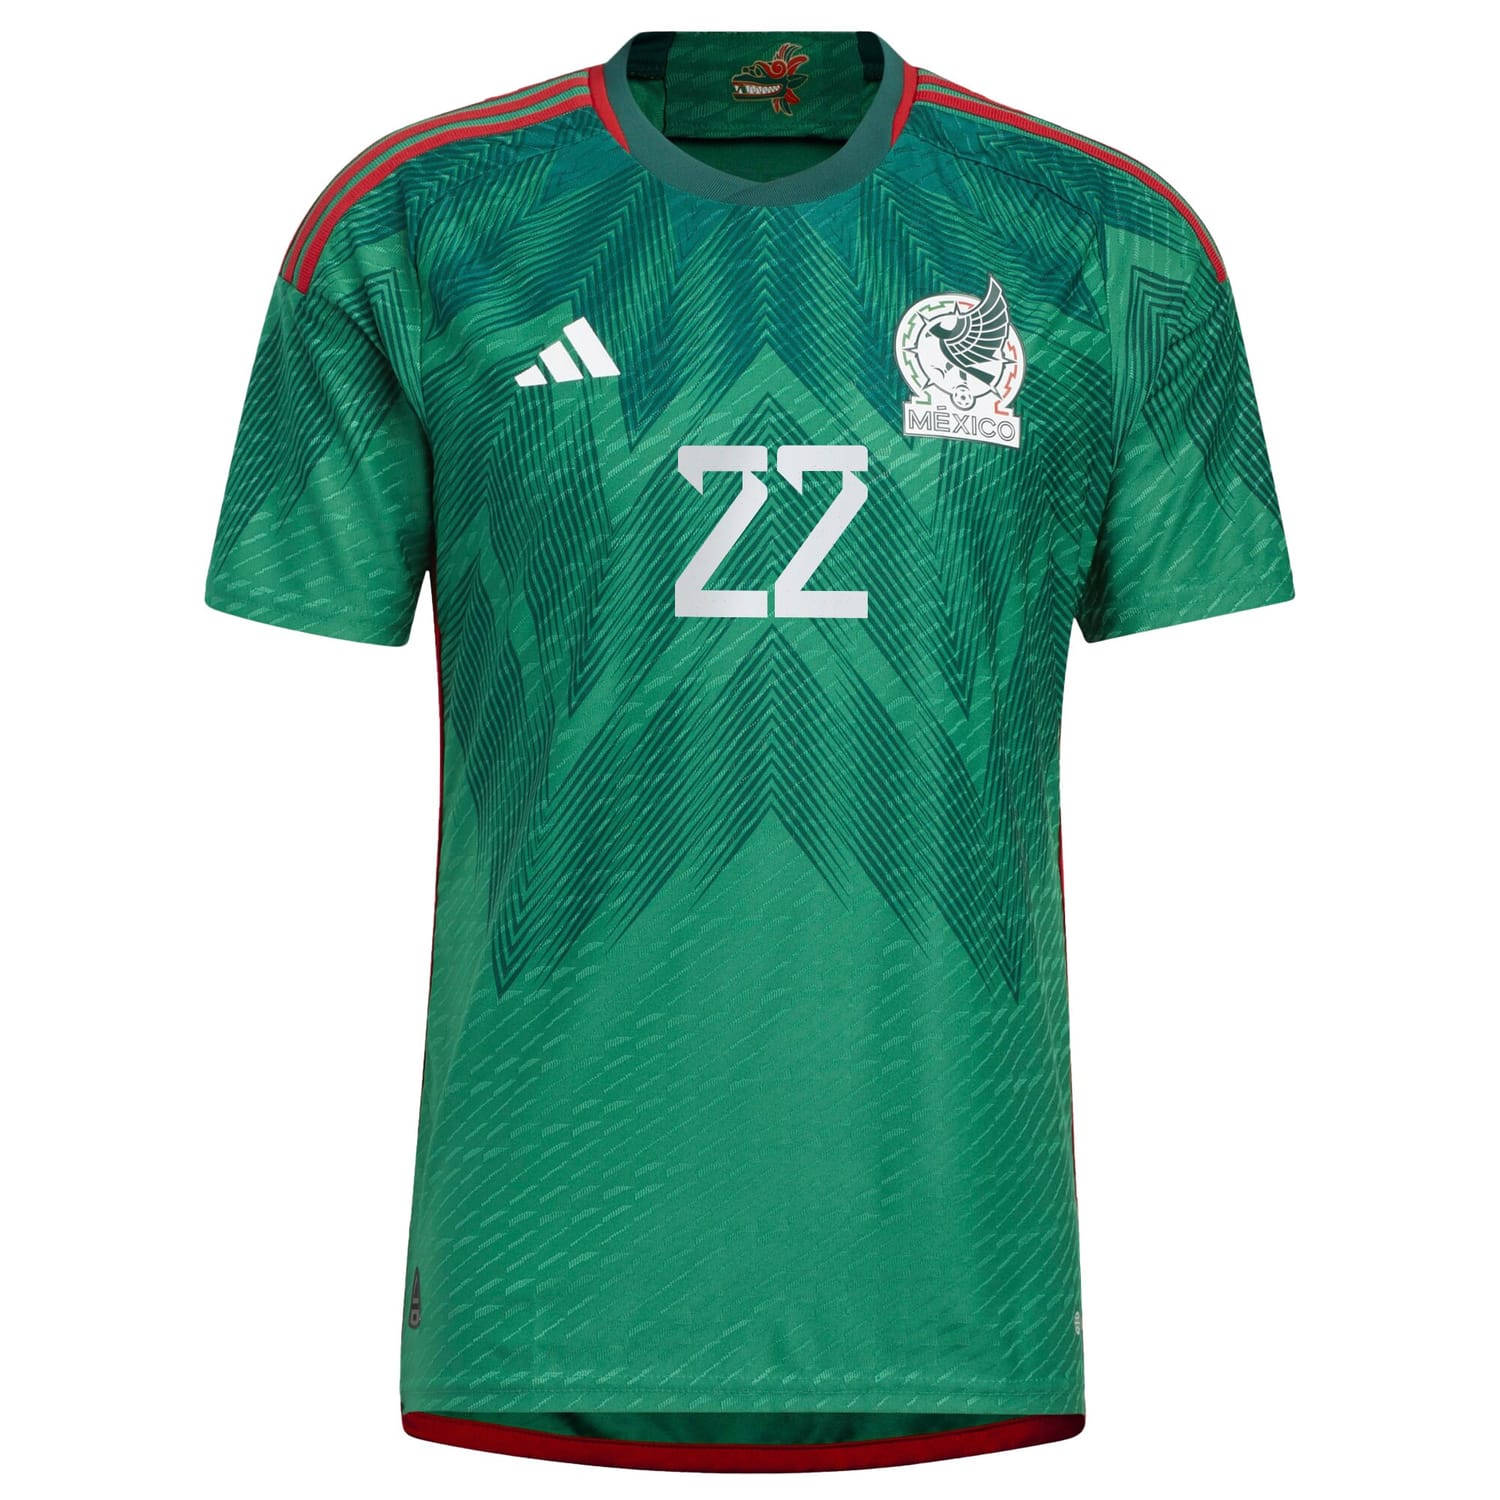 Mexico National Team Home Authentic Jersey Shirt Green 2022-23 player Hirving Lozano printing for Men